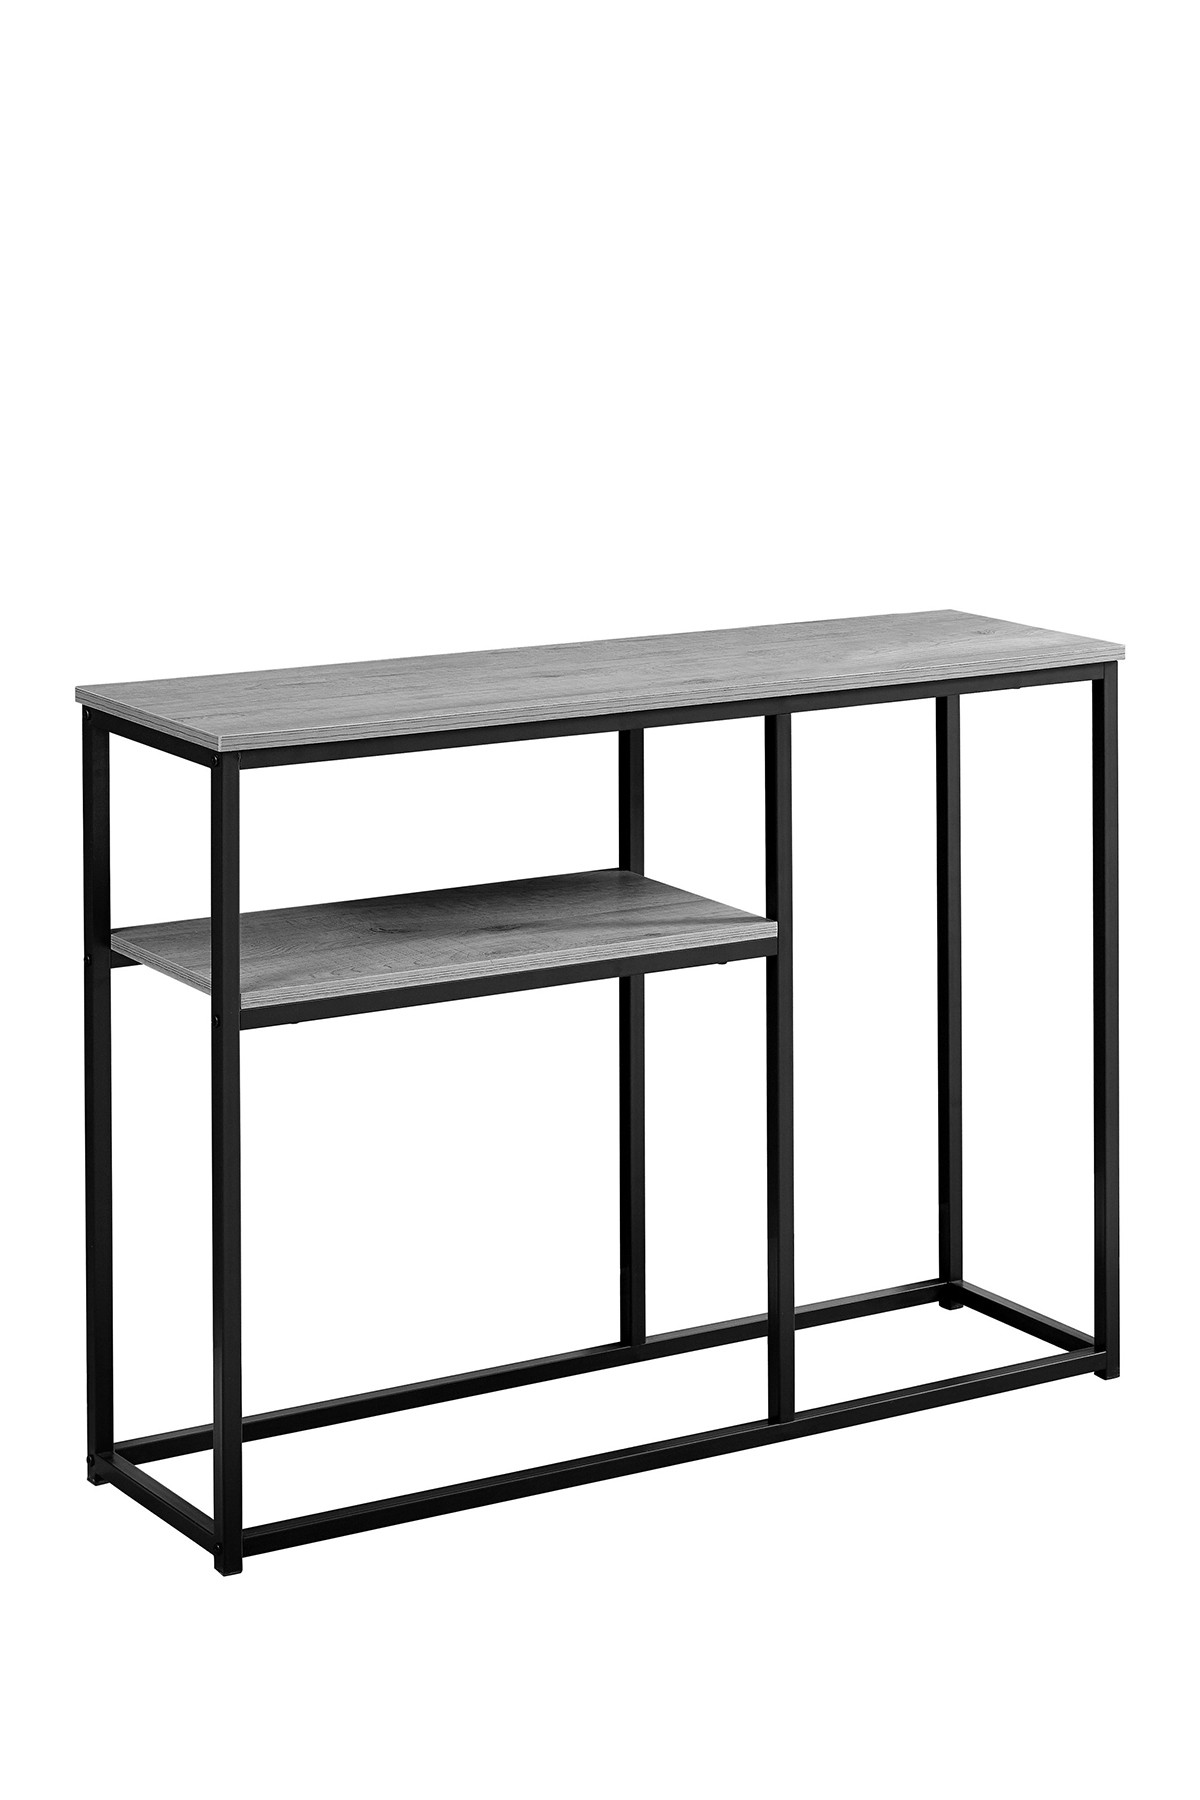 monarch specialties grey hall console accent table nordstrom rack white galvanized metal side high round ikea slim armchairs for living room silver cocktail free quilted runner